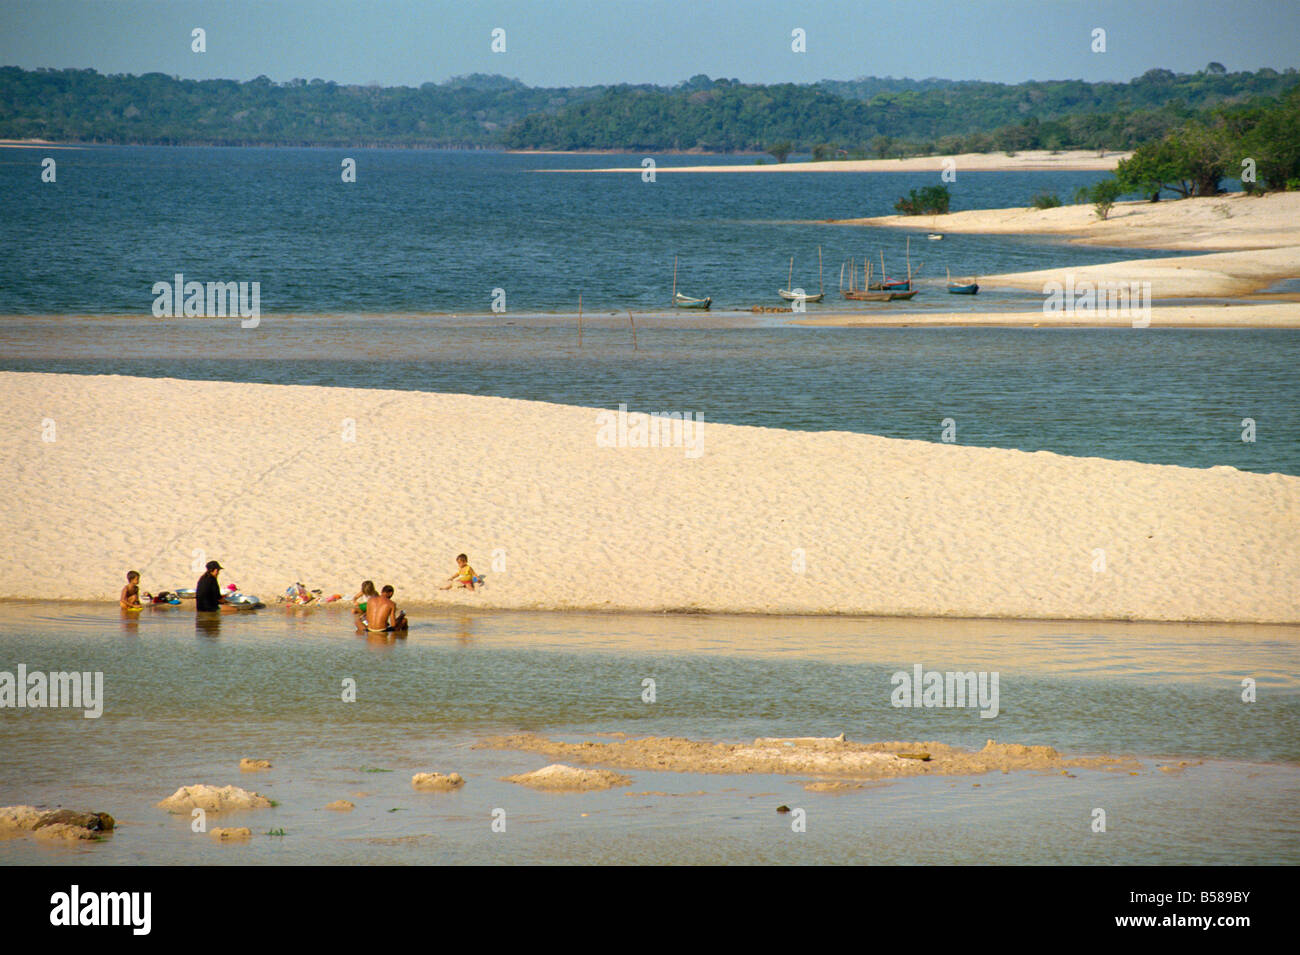 Groups of people and boats on the sand spit beaches at Alter do Chao on the Tapajos River in the Amazon area of Brazil Stock Photo